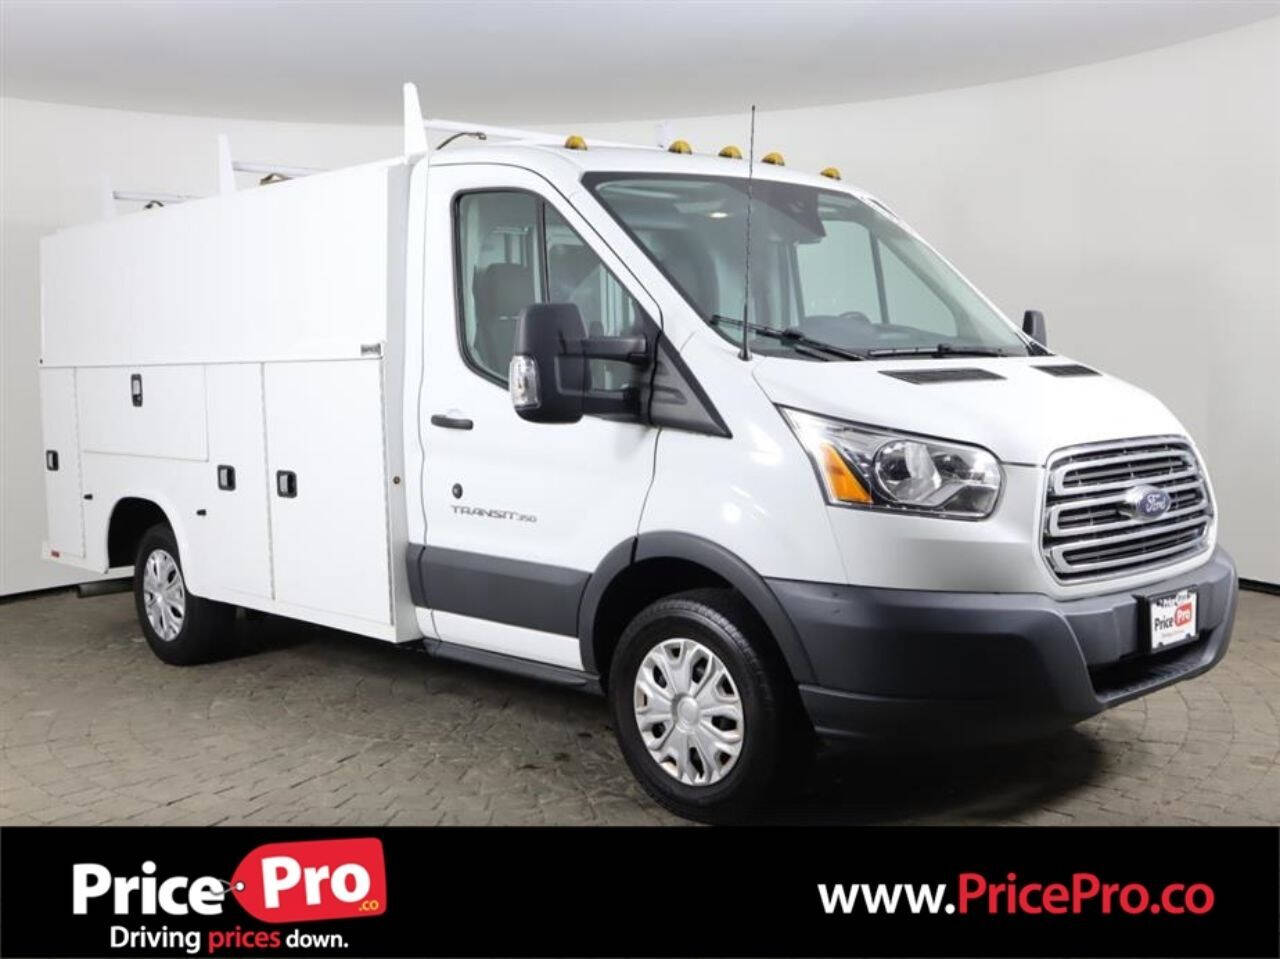 Used Ford Transit Cutaway For Sale Carsforsale Com